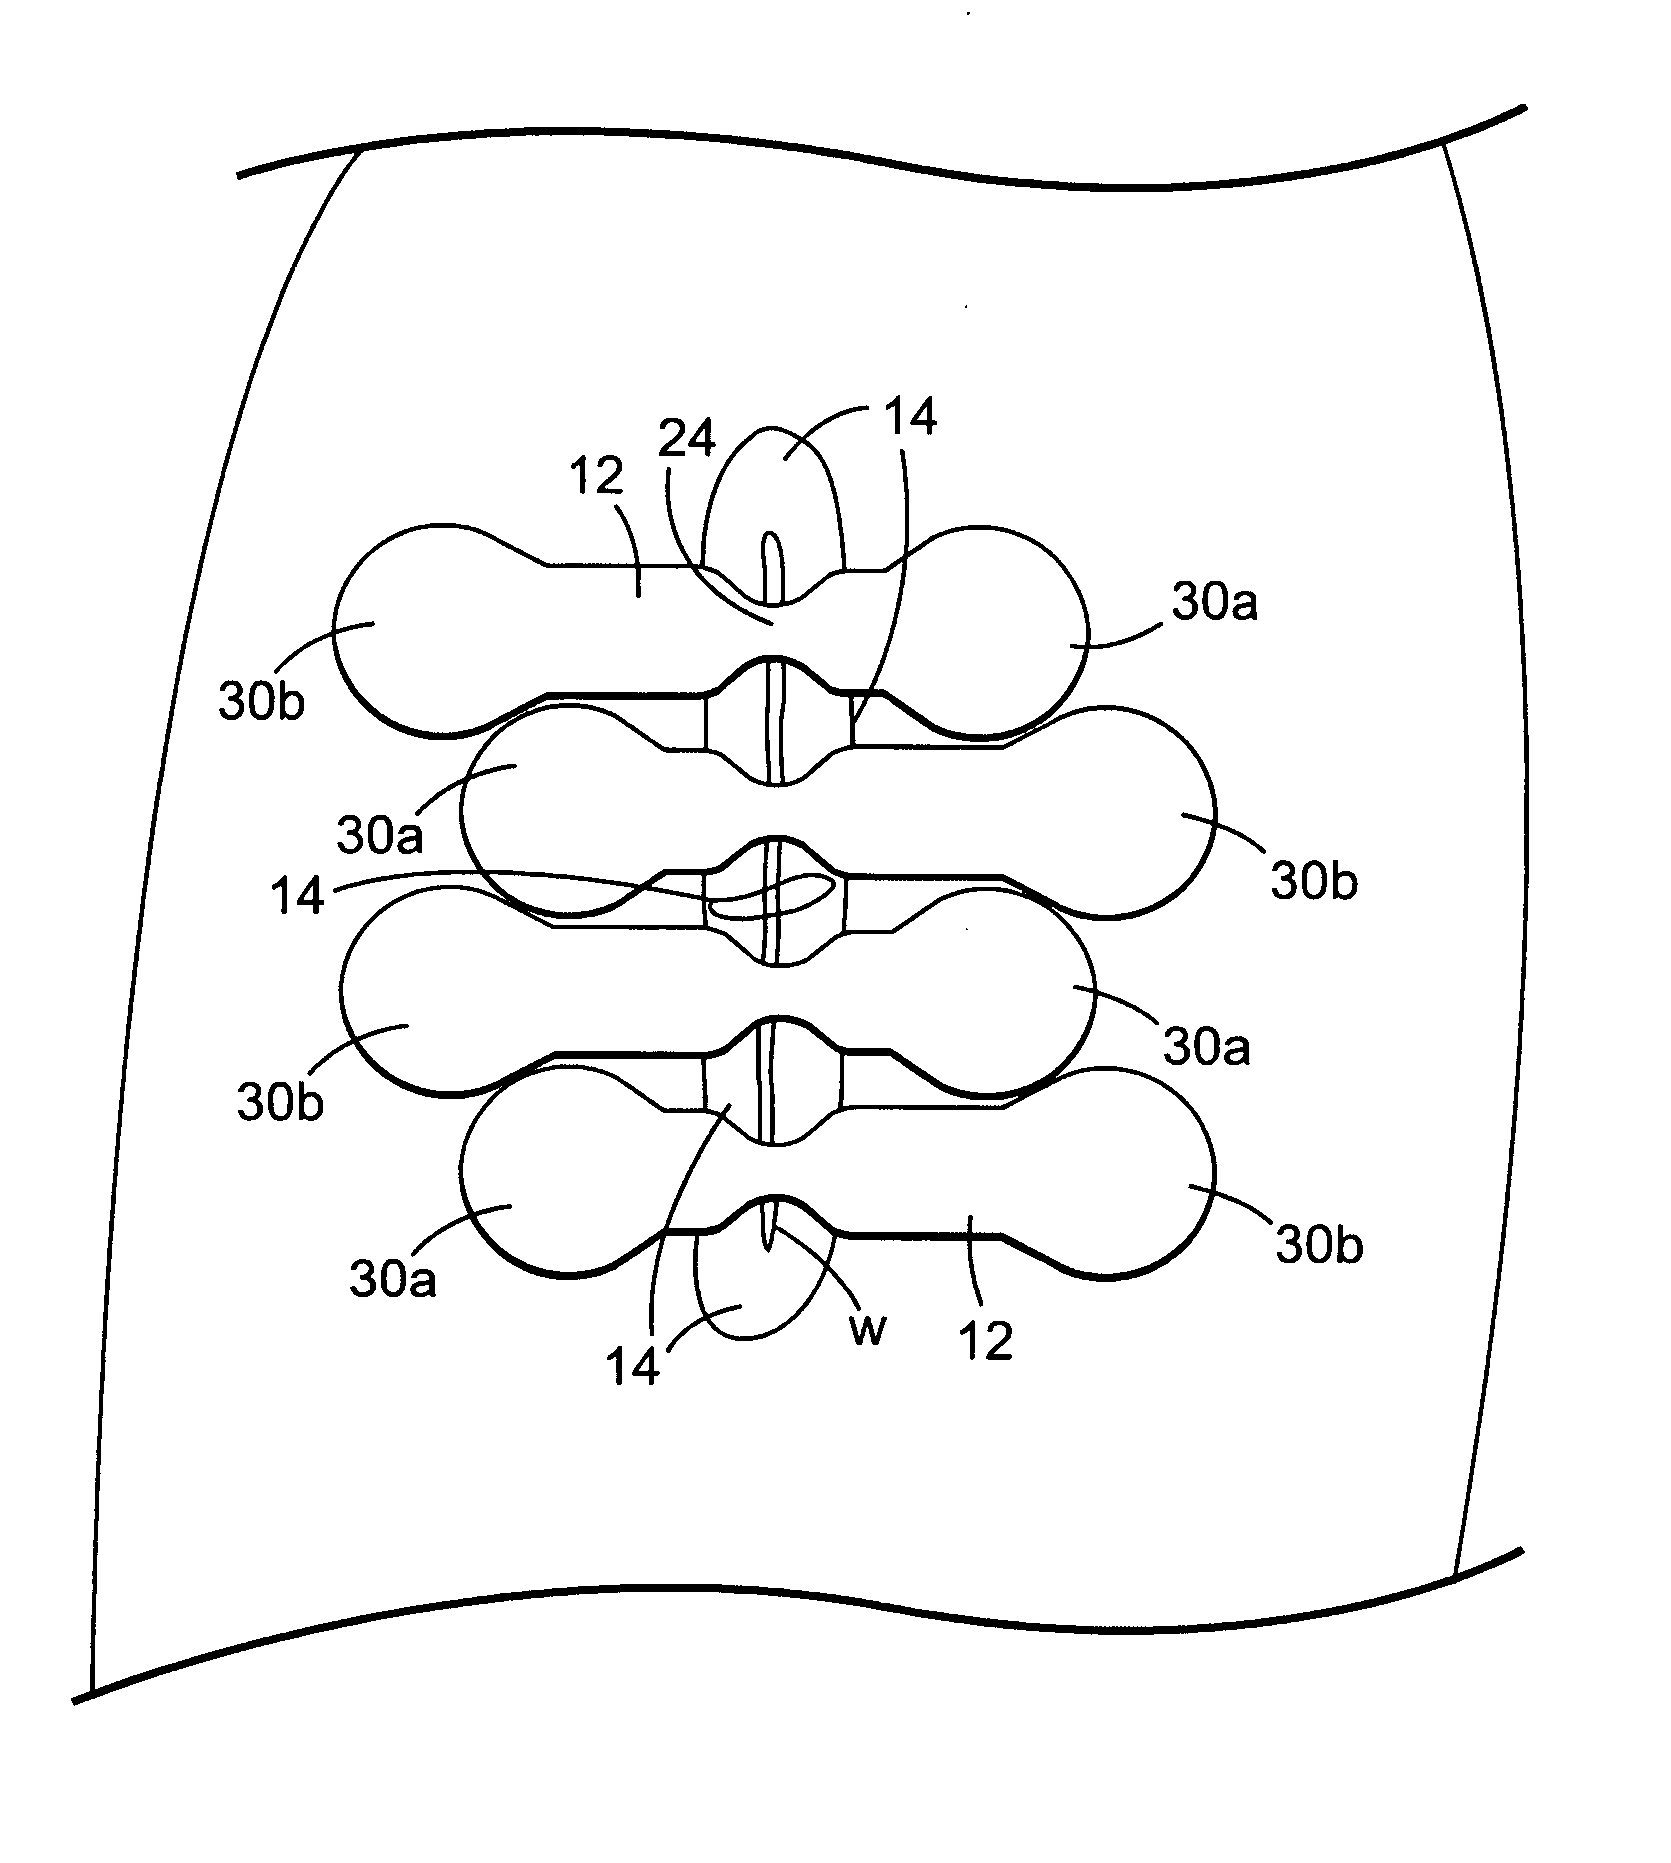 Wound closure system and method